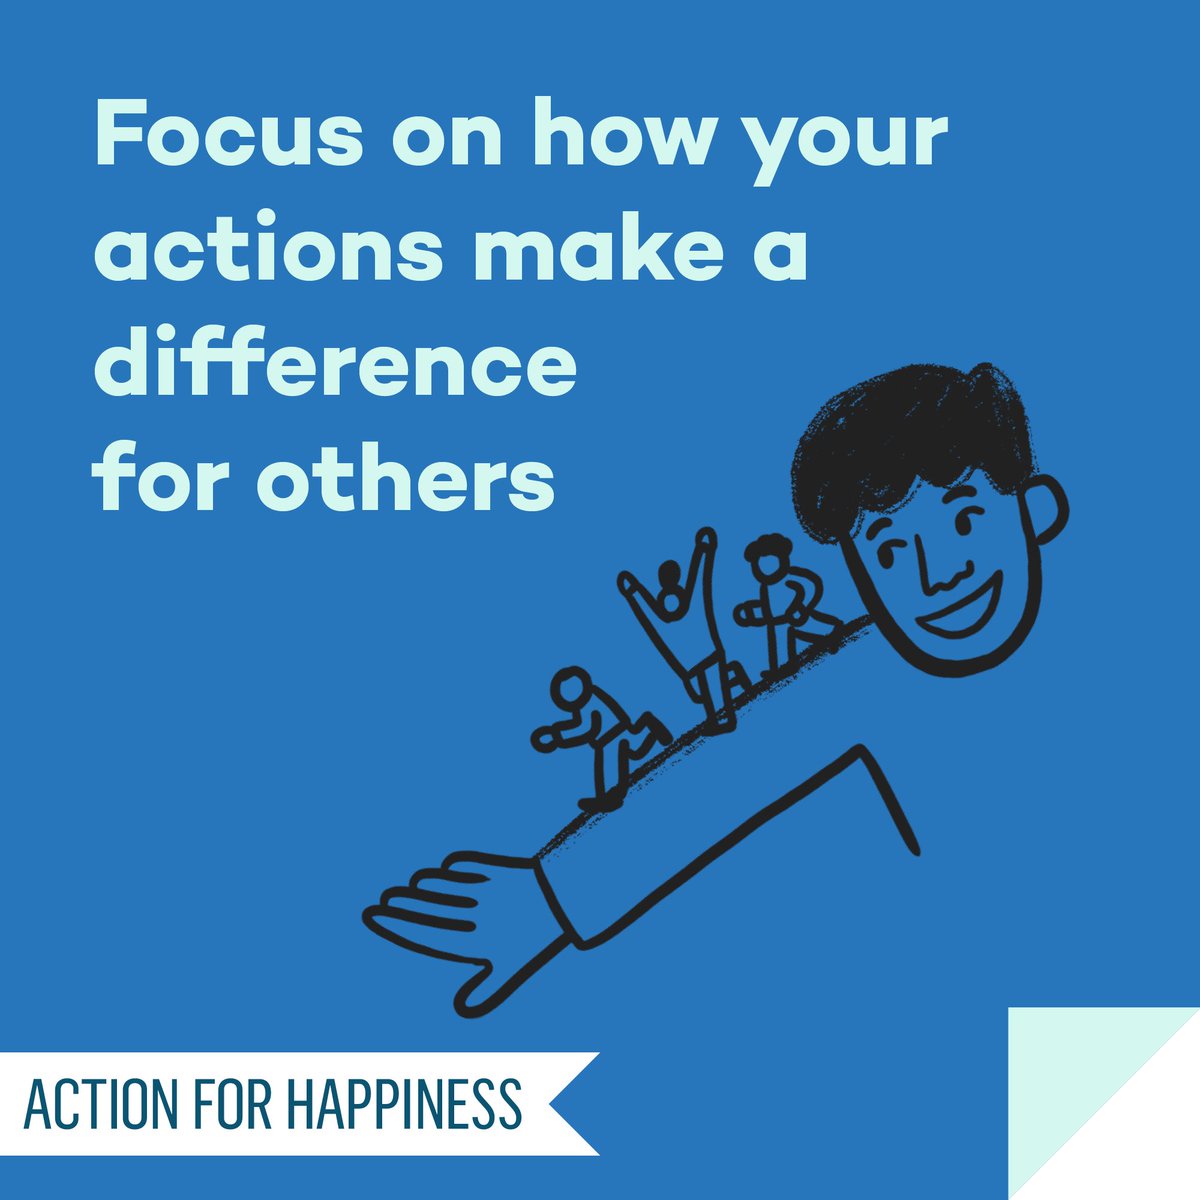 Meaningful May - Day 27: Focus on how your actions make a difference for others actionforhappiness.org/meaningful-may #MeaningfulMay